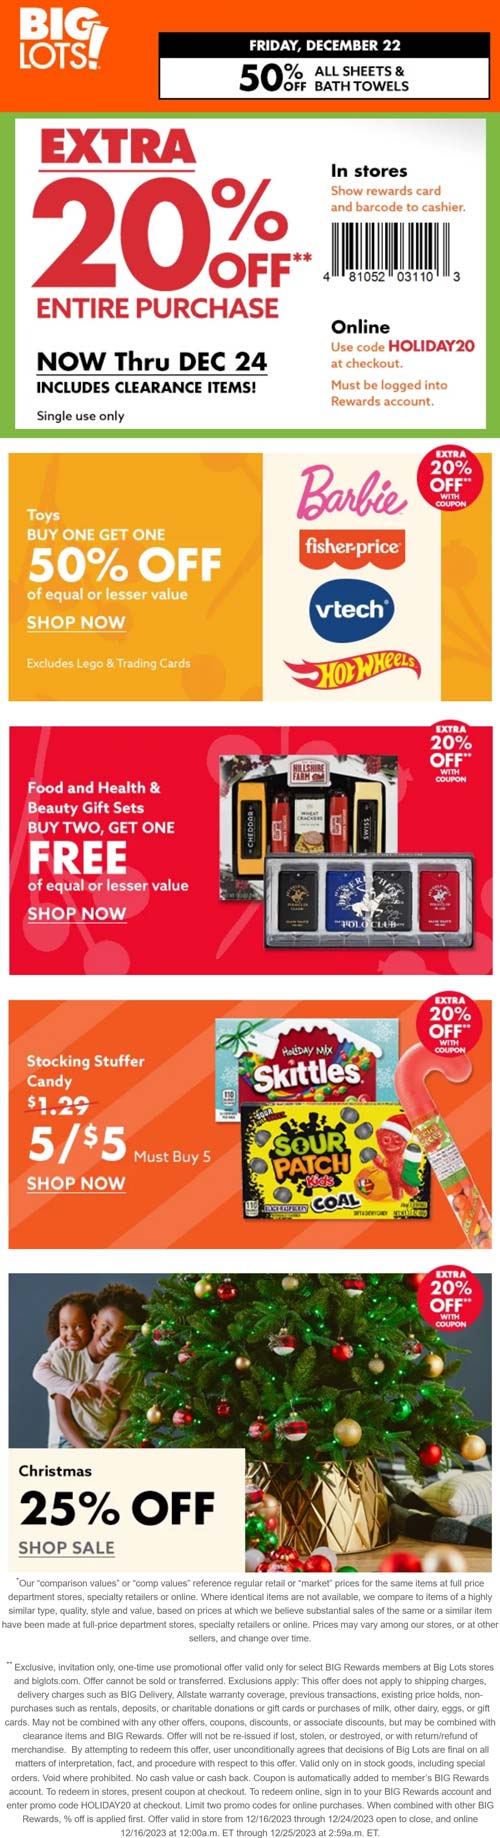 Extra 20% off everything at Big Lots, or online via promo code HOLIDAY20 #biglots